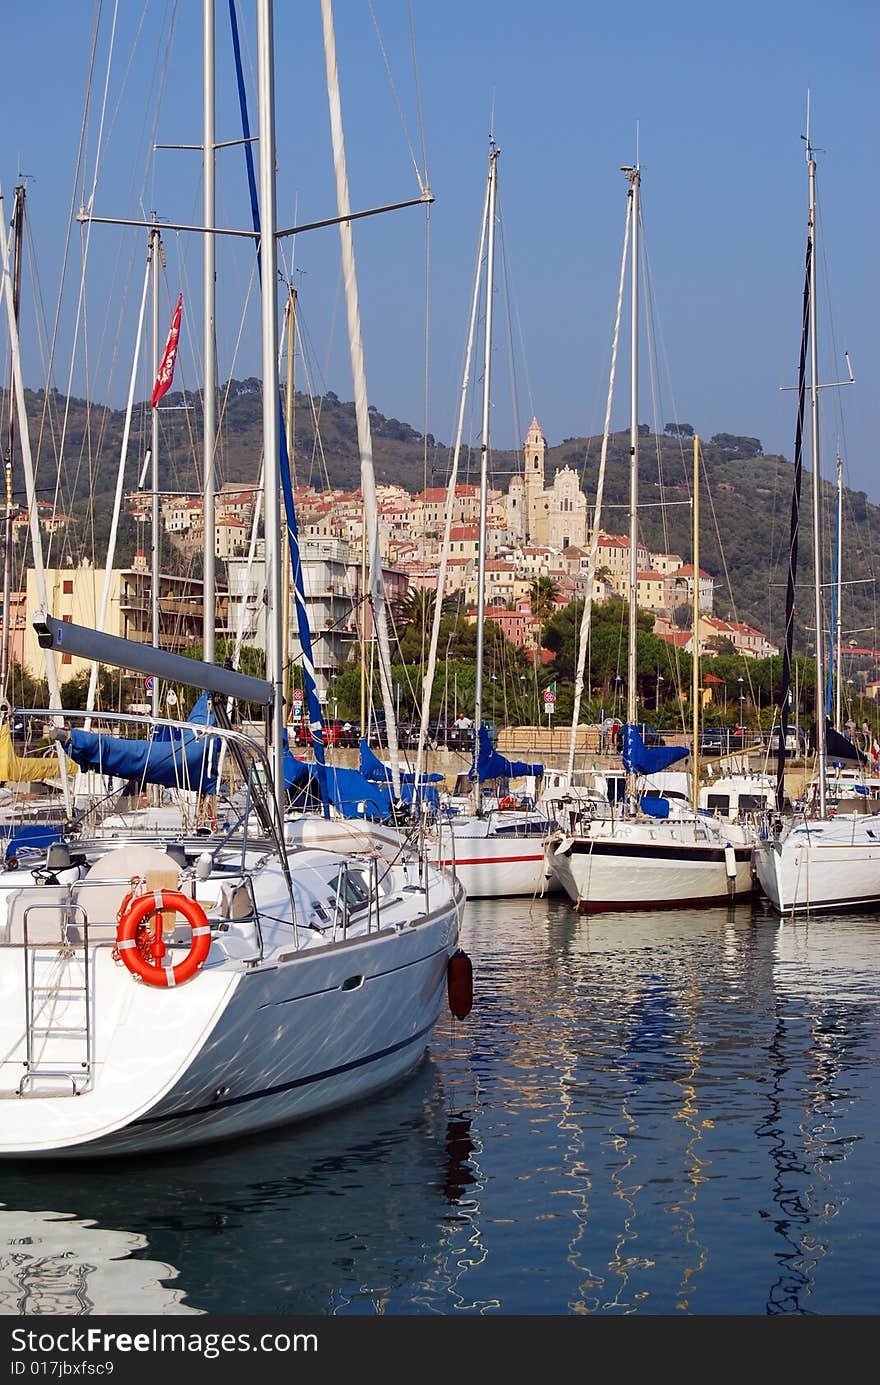 View of Cervo, medieval village in Liguria, Italy from the little harbour of San Bartolomeo.